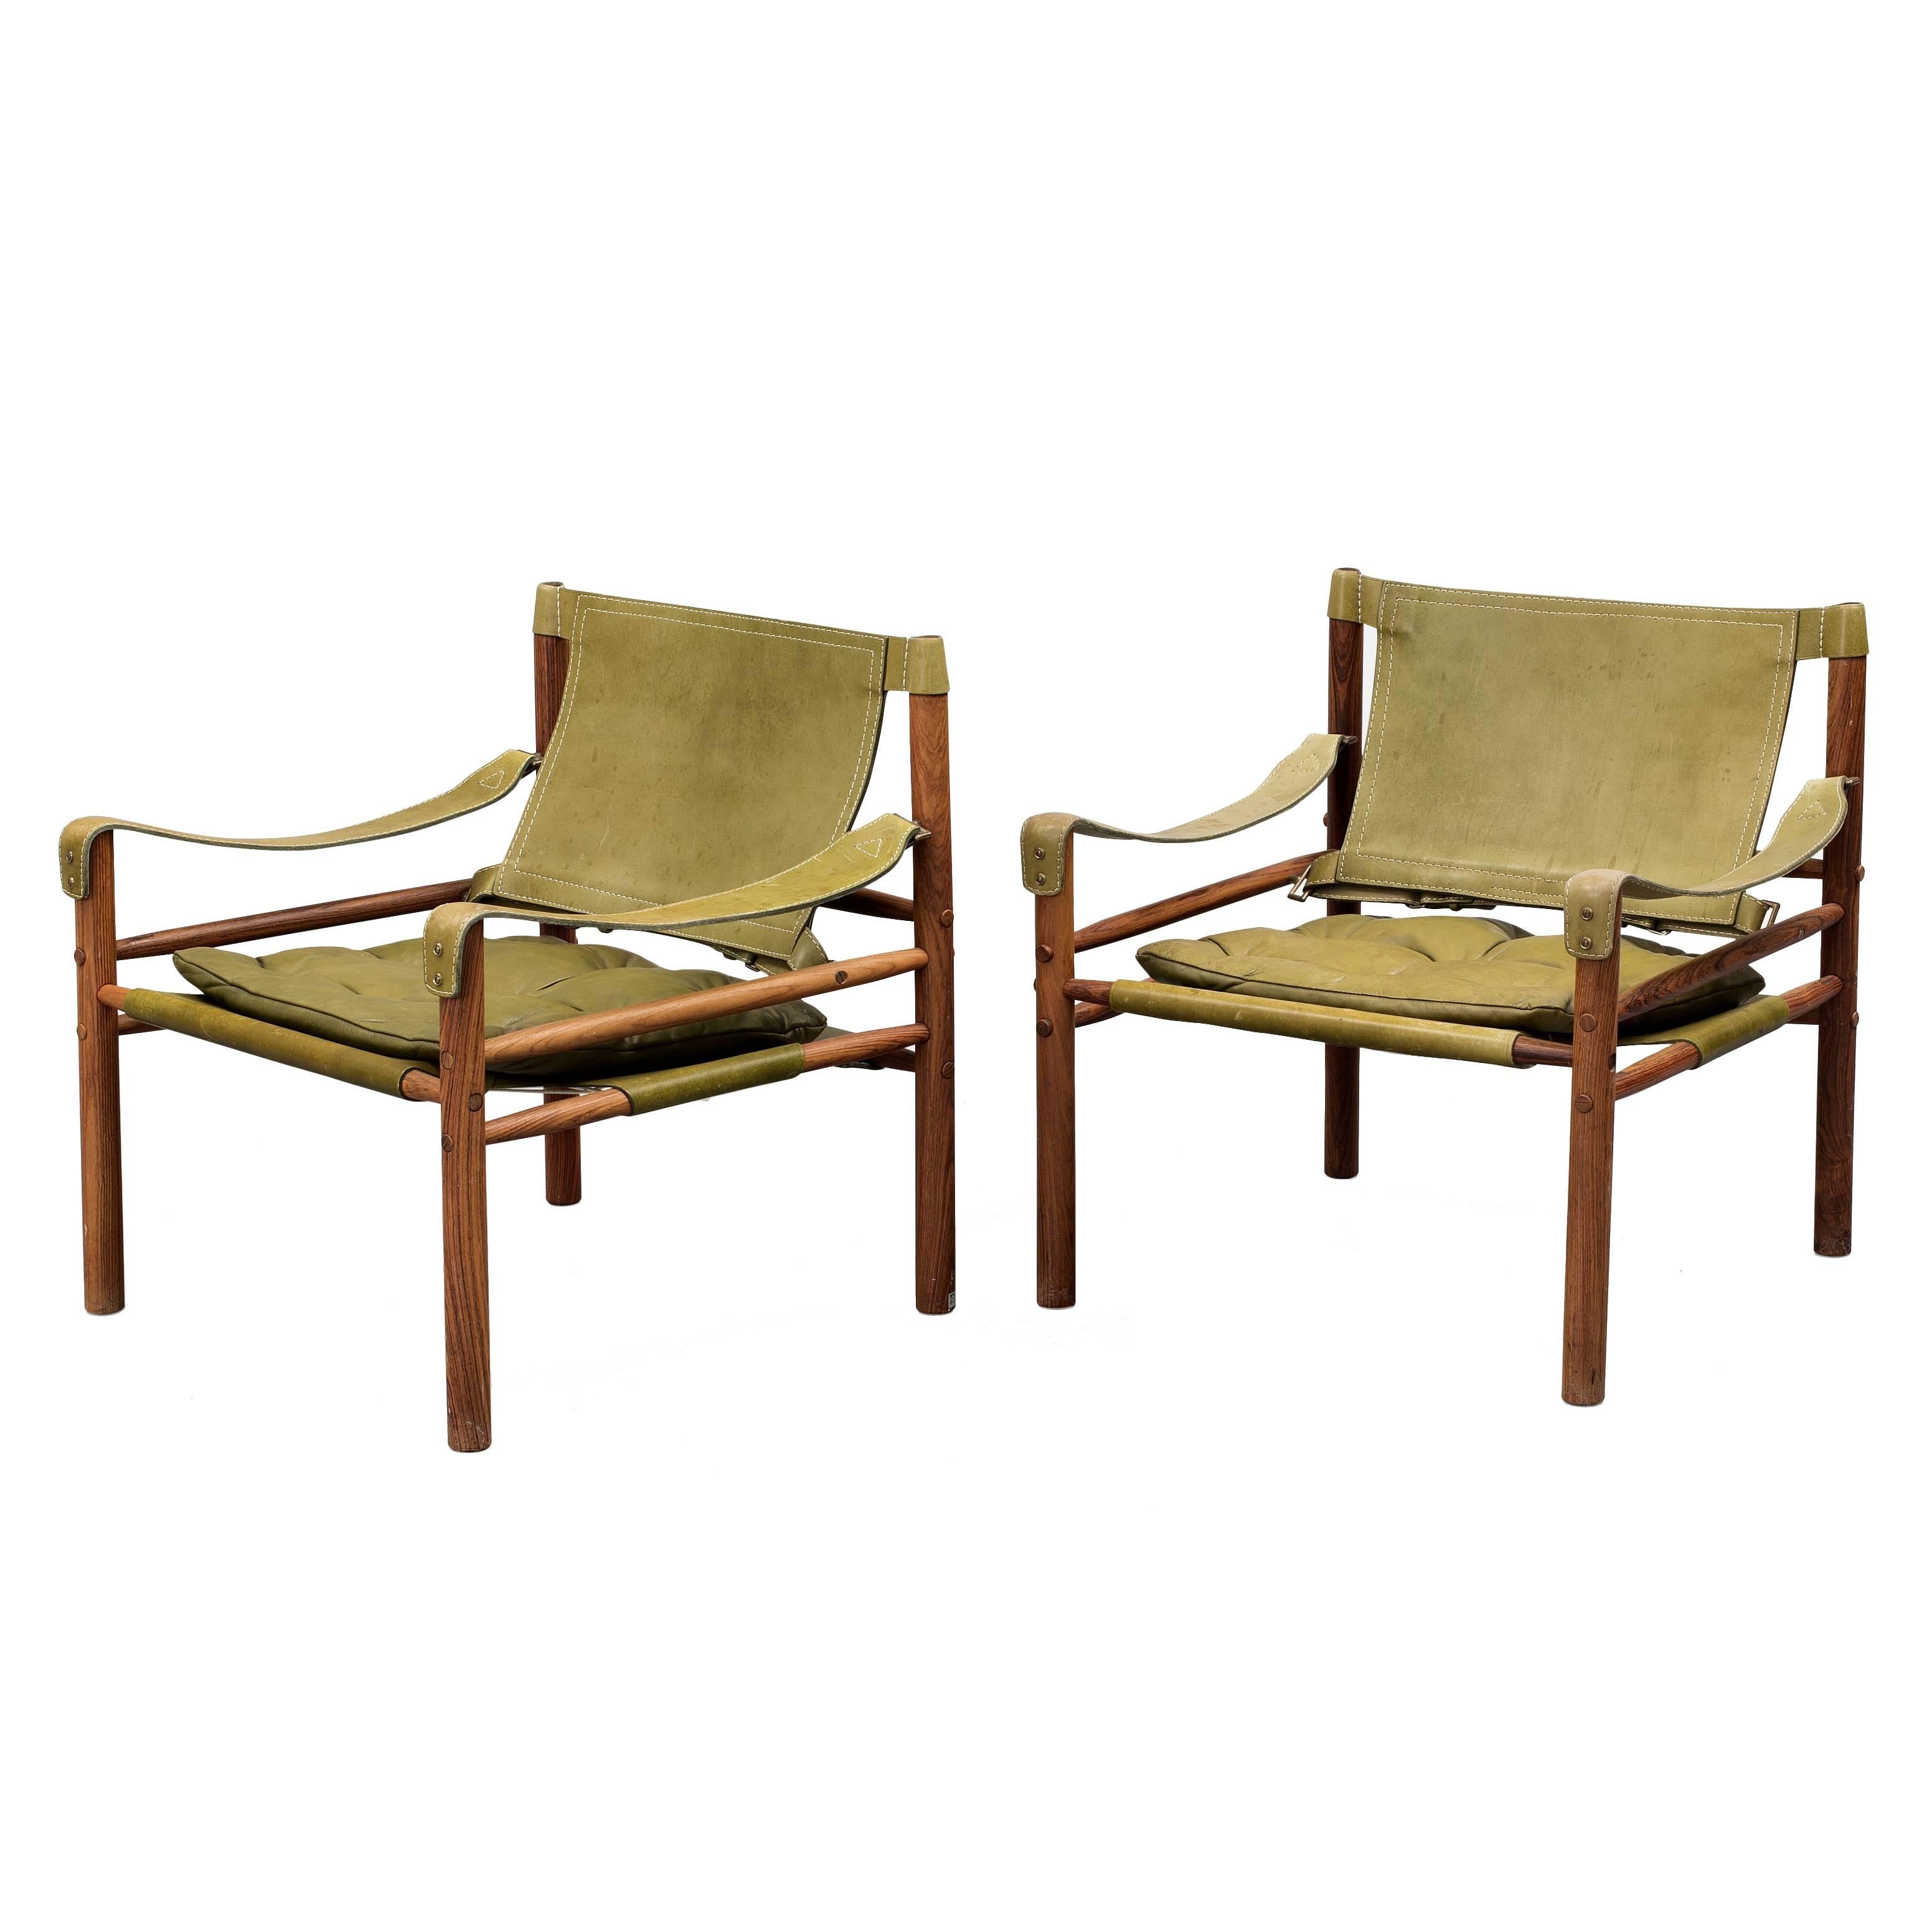 Pair of Arne Norell 'Sirocco' Safari Chairs, Aneby Mobler, Sweden, 1960s